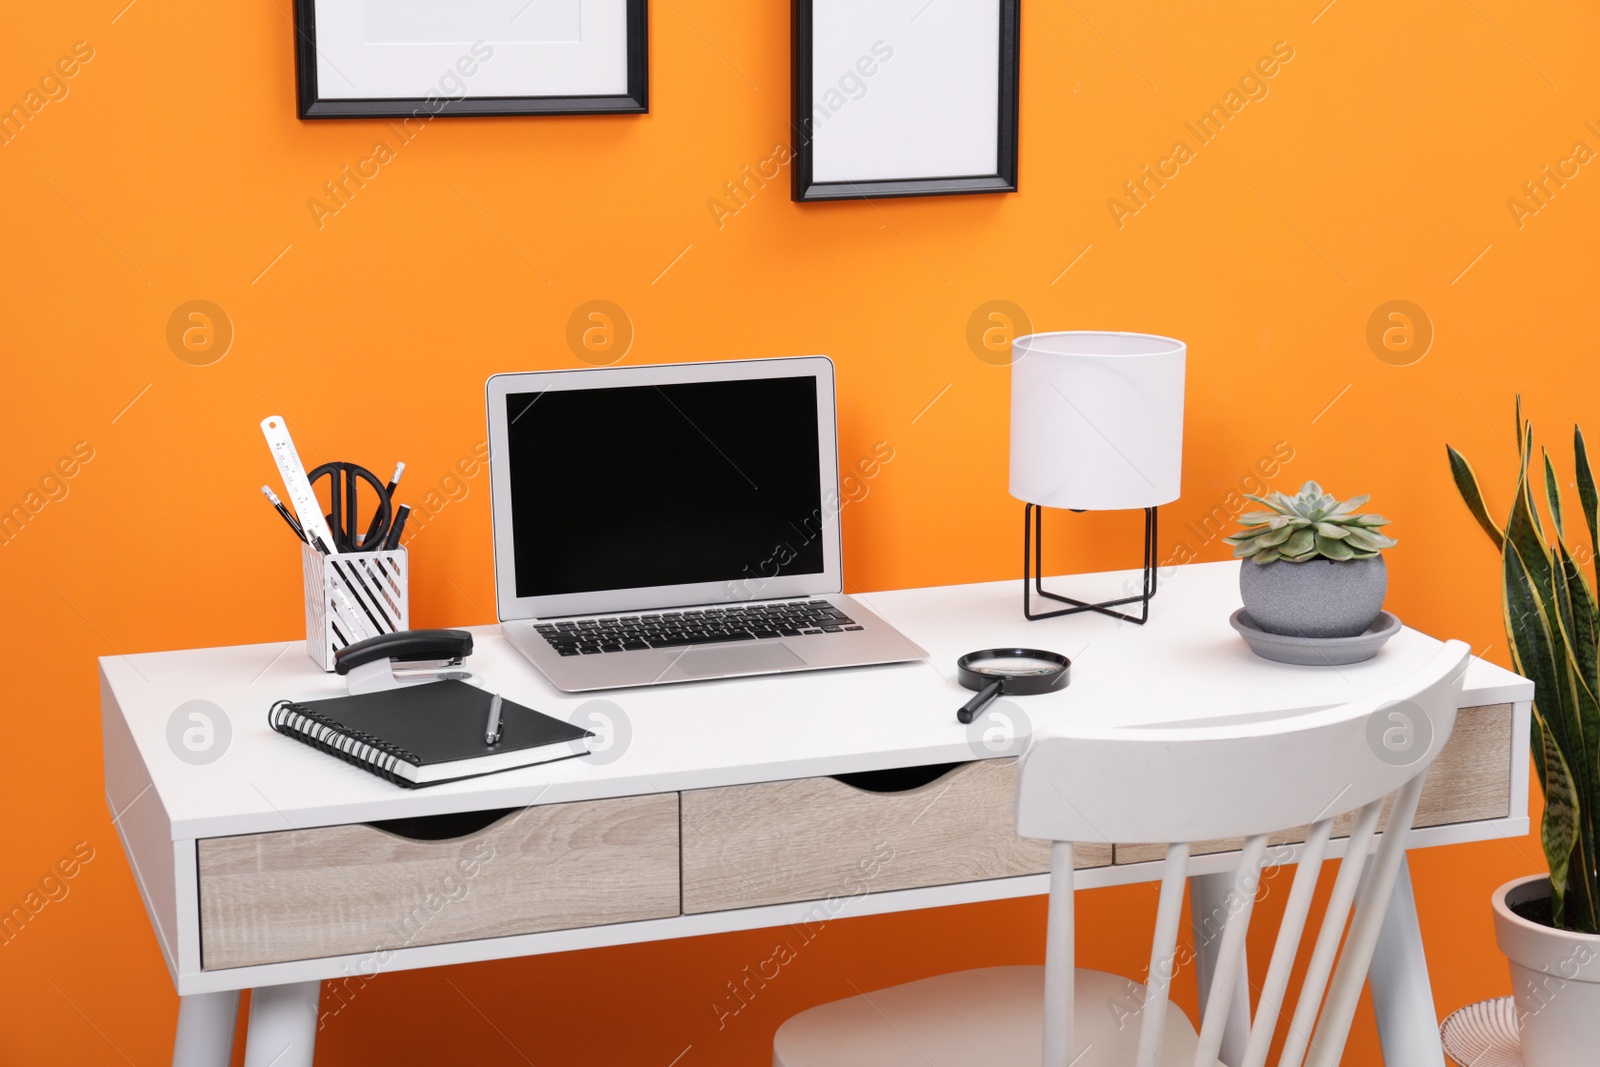 Photo of Workplace with laptop, stationery on desk and chair near orange wall. Home office